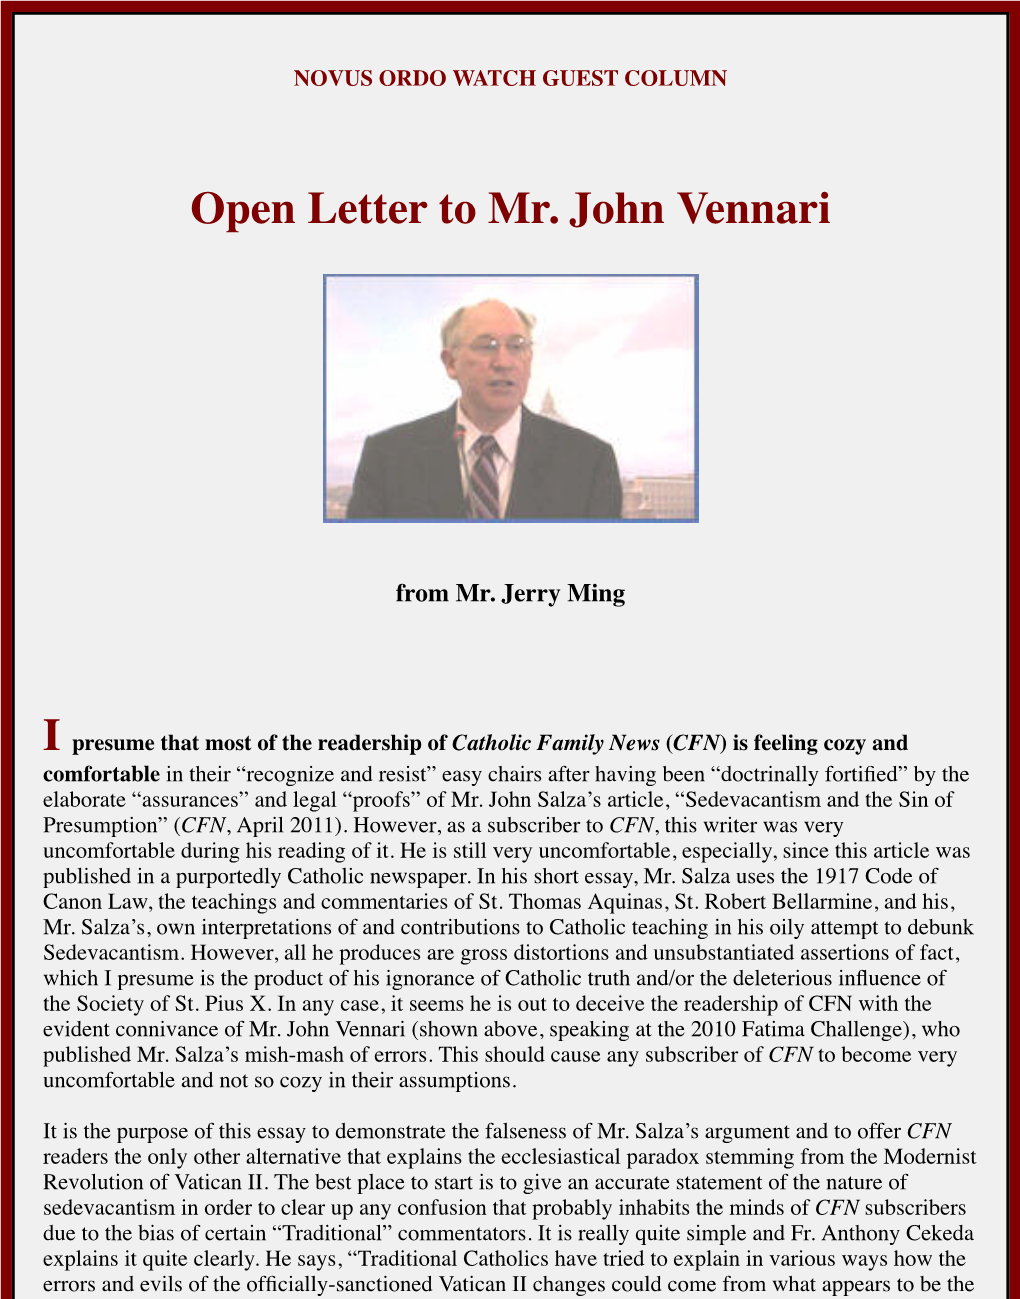 Open Letter to Mr. John Vennari by Jerry Meng